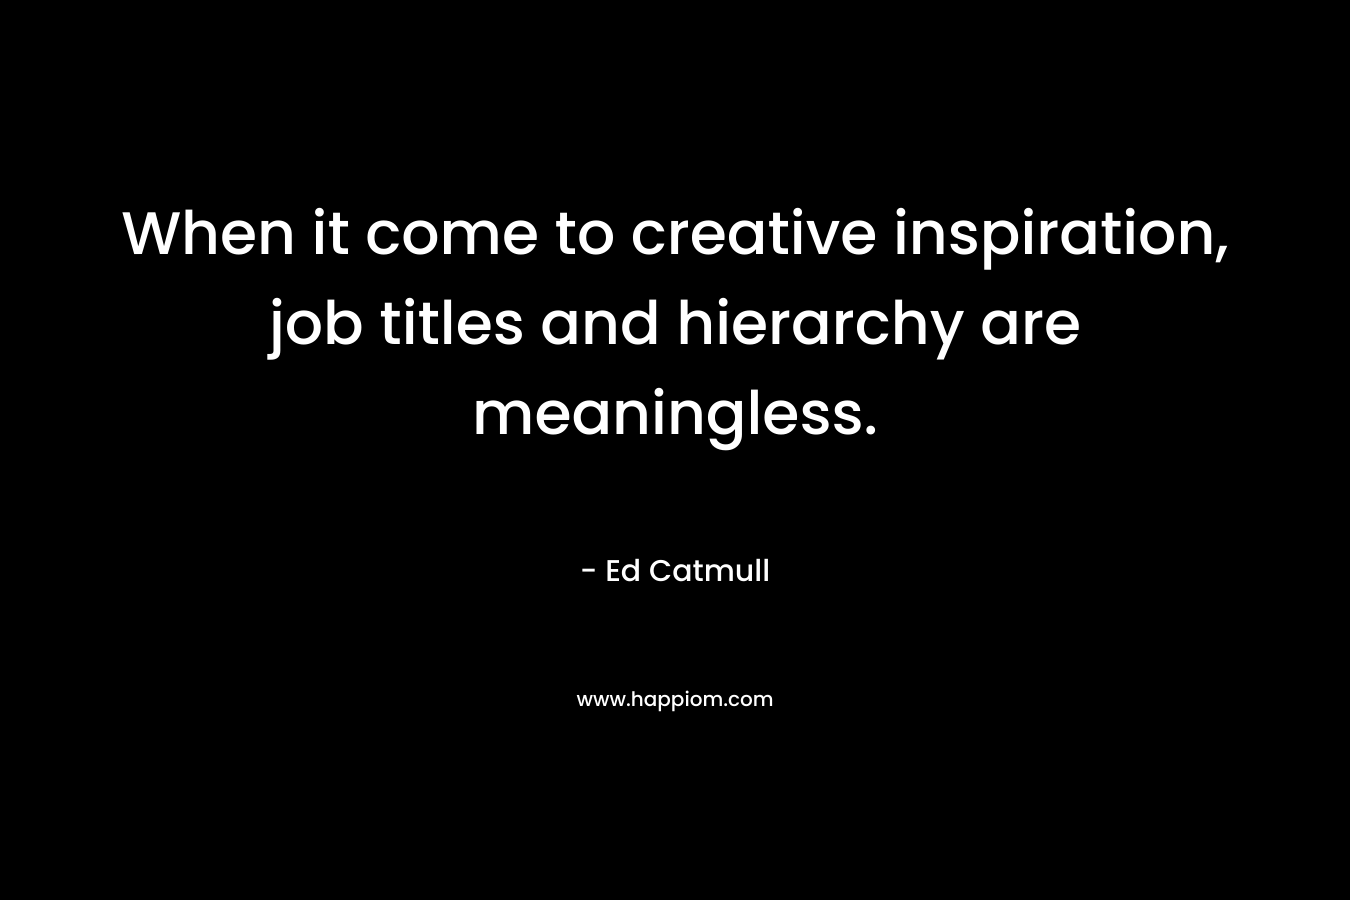 When it come to creative inspiration, job titles and hierarchy are meaningless.